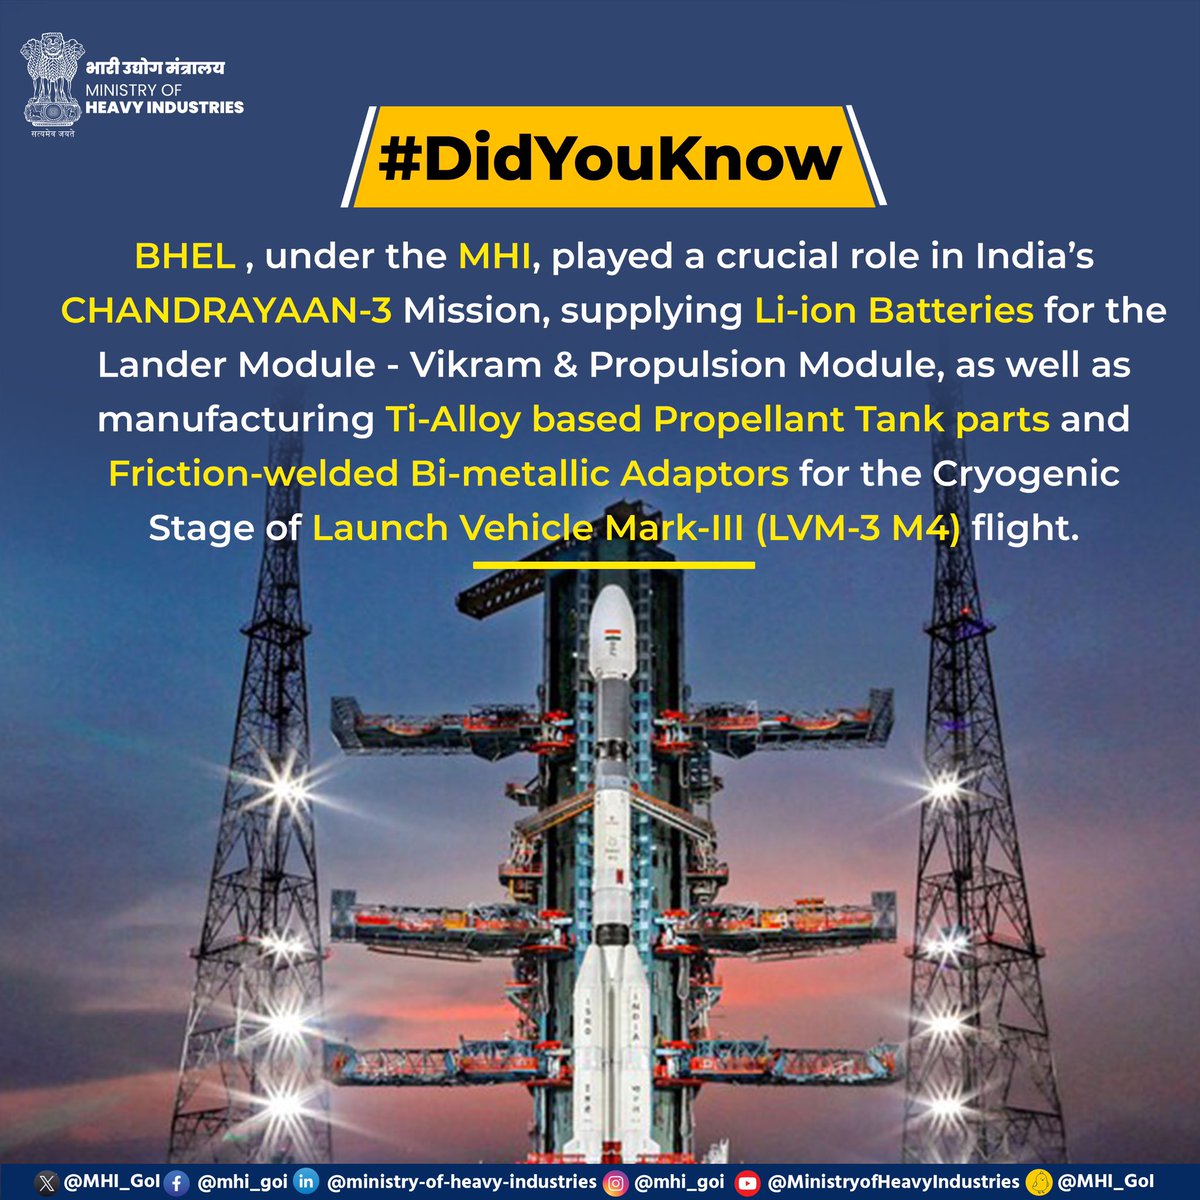 #DidYouKnow 

BHEL, under MHI, has supplied space-grade solar panels and lithium-ion batteries for numerous #ISRO satellites including CHANDRAYAAN-3. #MHI and #BHEL are dedicated to providing technological solutions for a #ViksitBharat and #AatmanirbharBharat